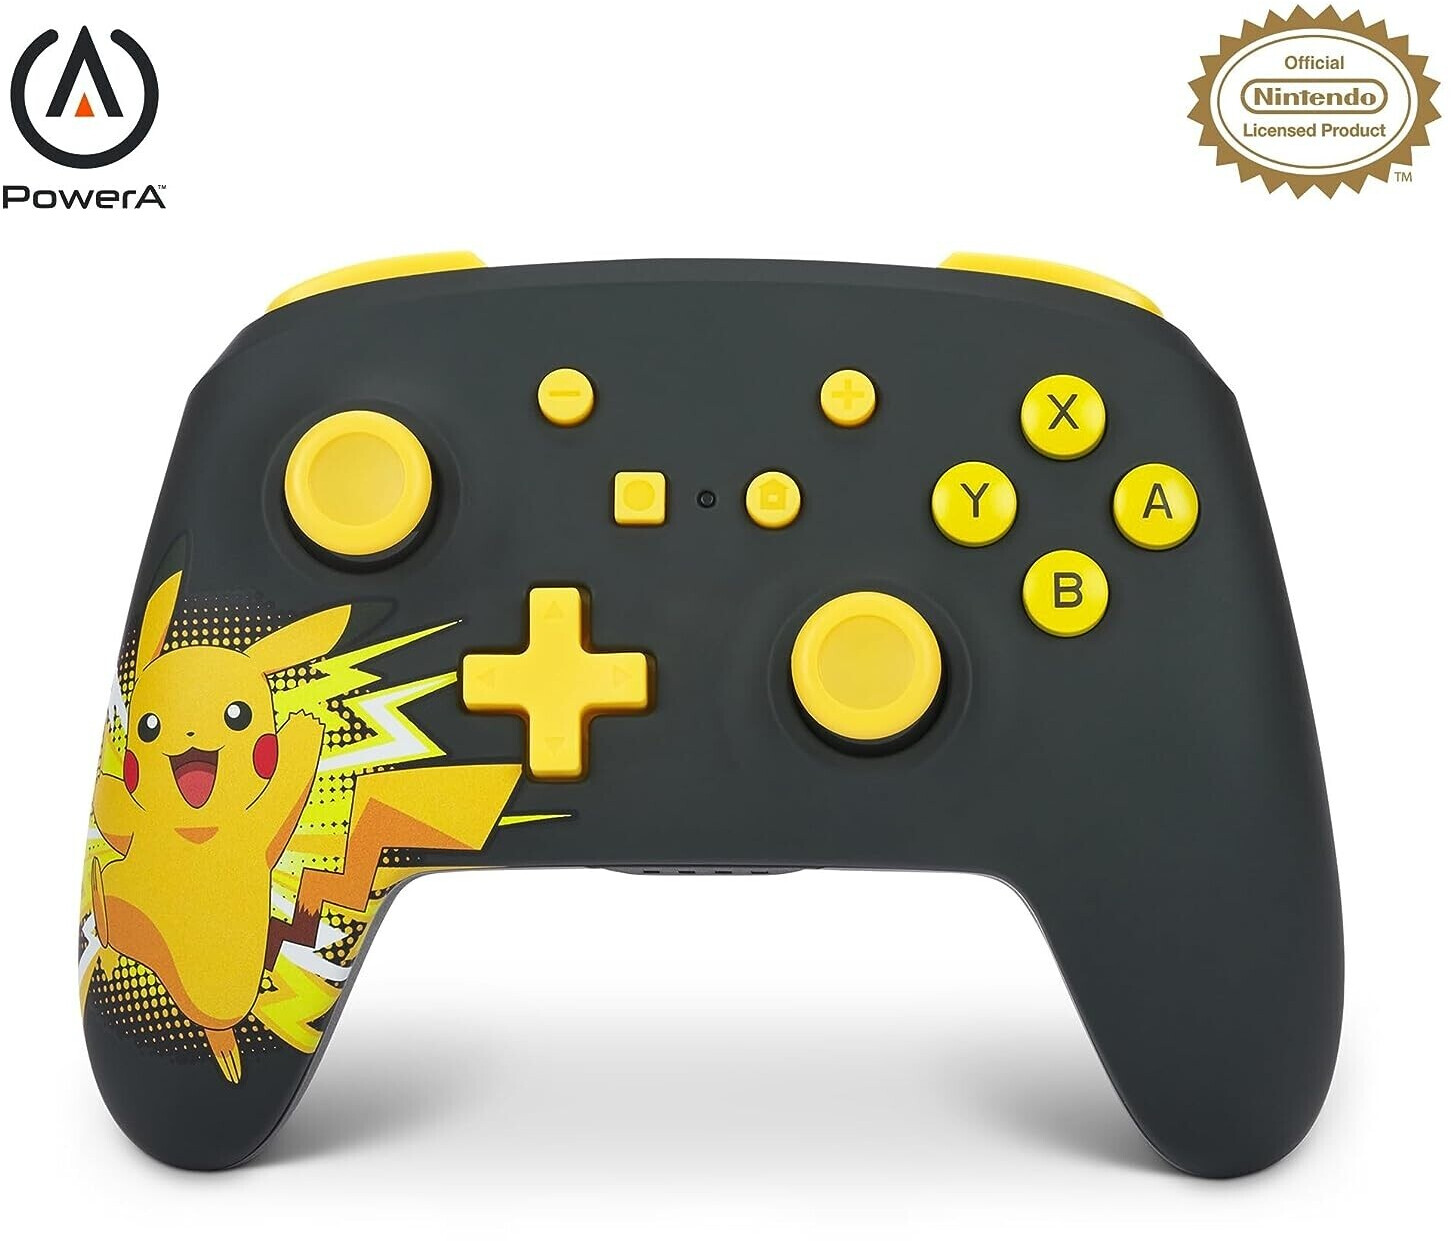 Freaks and Geeks Manette pour Switch (224662) Harry Potter au